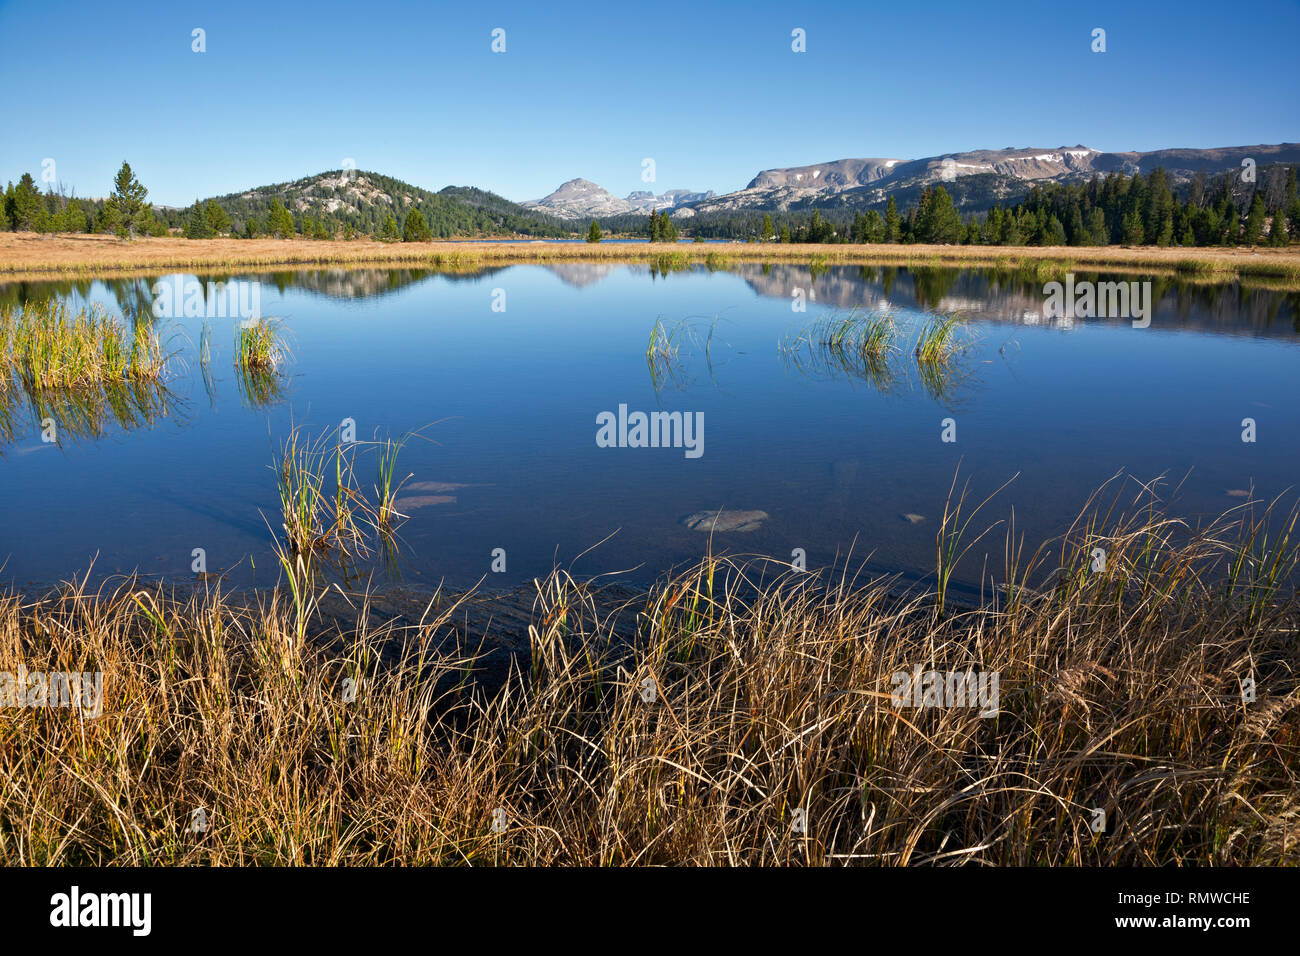 WY03753-00...WYOMING - The Beartooth Mountains reflecting in a small pond near Island Lake in the Shoshone National Forest. Stock Photo